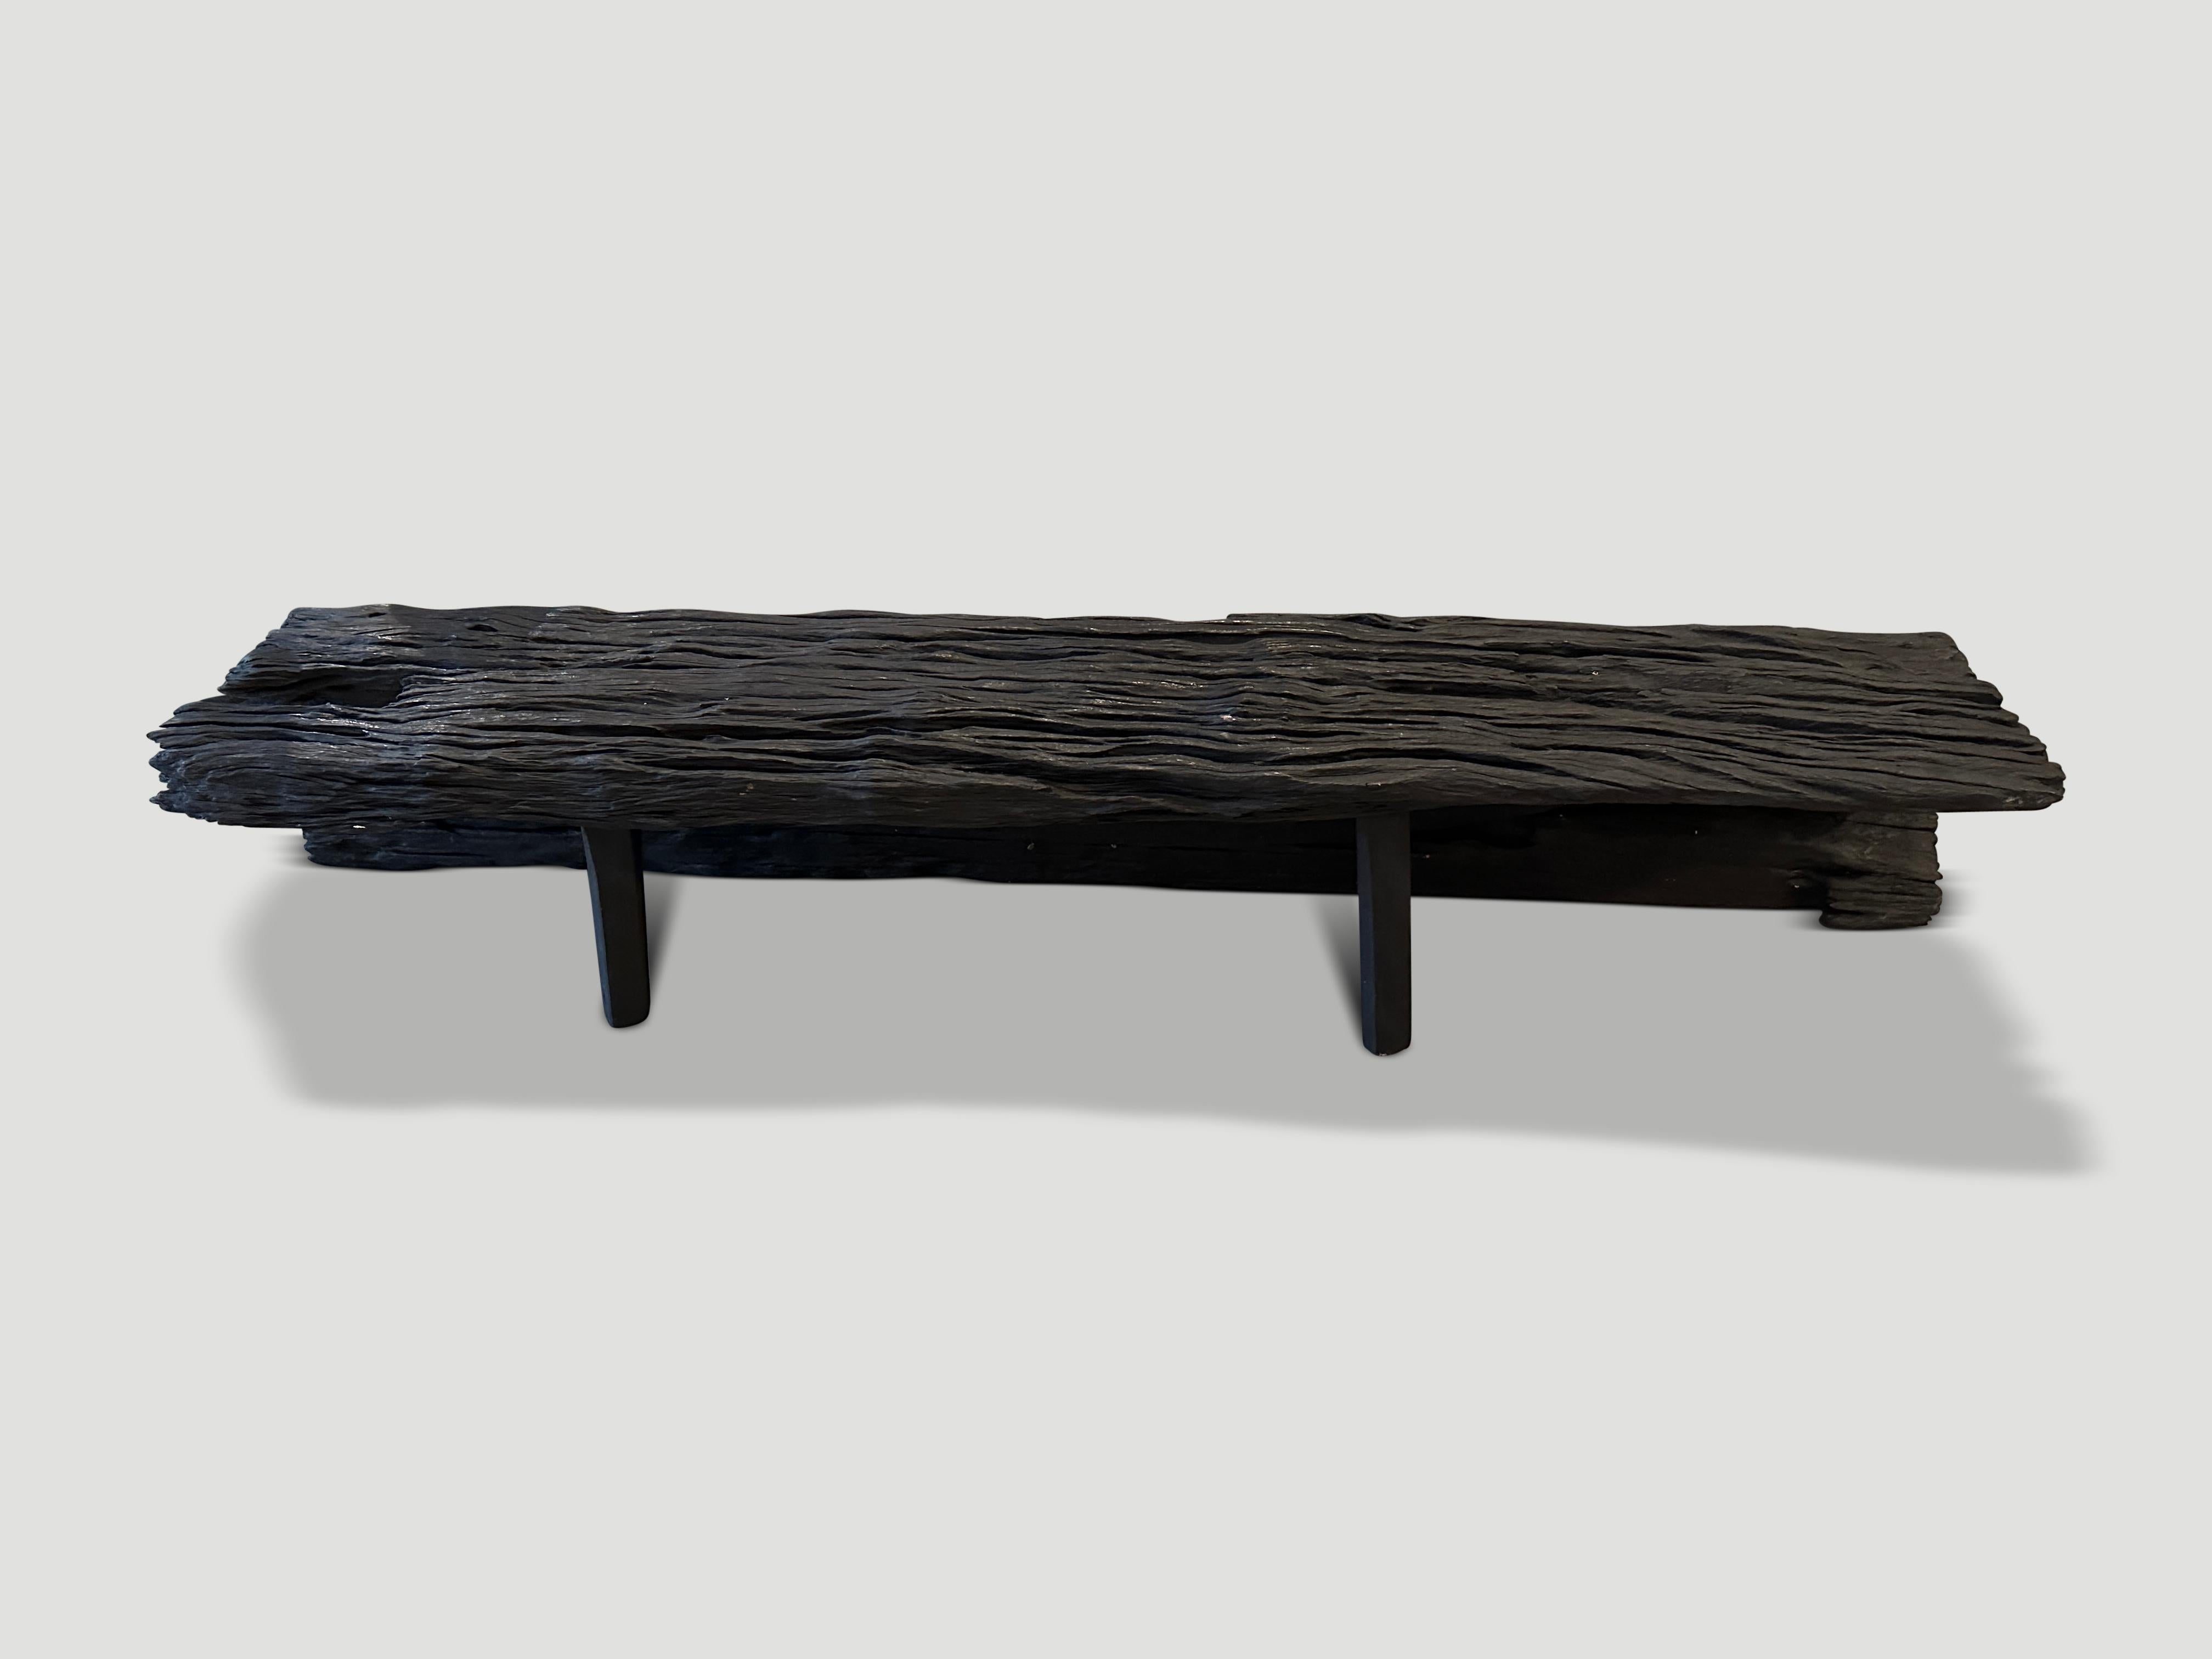 Beautiful iron wood long bench, both sculptural and functional. Charred, sanded and sealed revealing the stunning detail in this century old wood. One of a kind piece from a single curved section. We added the minimalist legs to one side. It’s all